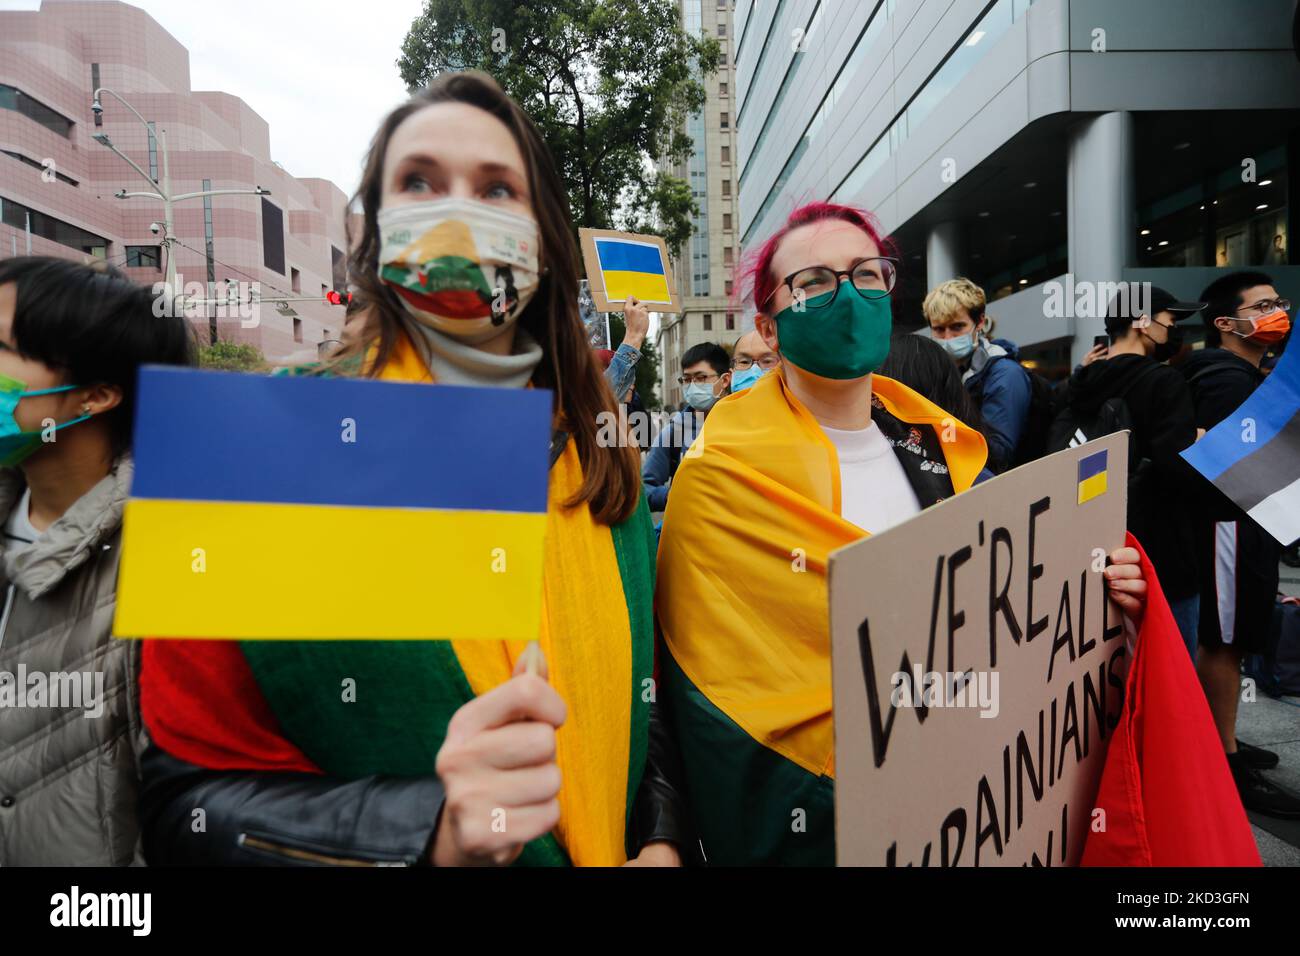 Demonstrators holding placards that read ‘We are all Ukrainians today’, and national flags of Ukraine and Lithuania, during a protest against Russian live-fire attacks on Ukraine, outside the Moscow-Taipei Coordination Commission in Taiwan, in Taipei, Taiwan, 25 February 2022. Several western countries including the US and UK have imposed sanctions on Russia, with Baltic states members including Lithuania and Estonia showing support of Ukraine. (Photo by Ceng Shou Yi/NurPhoto) Stock Photo